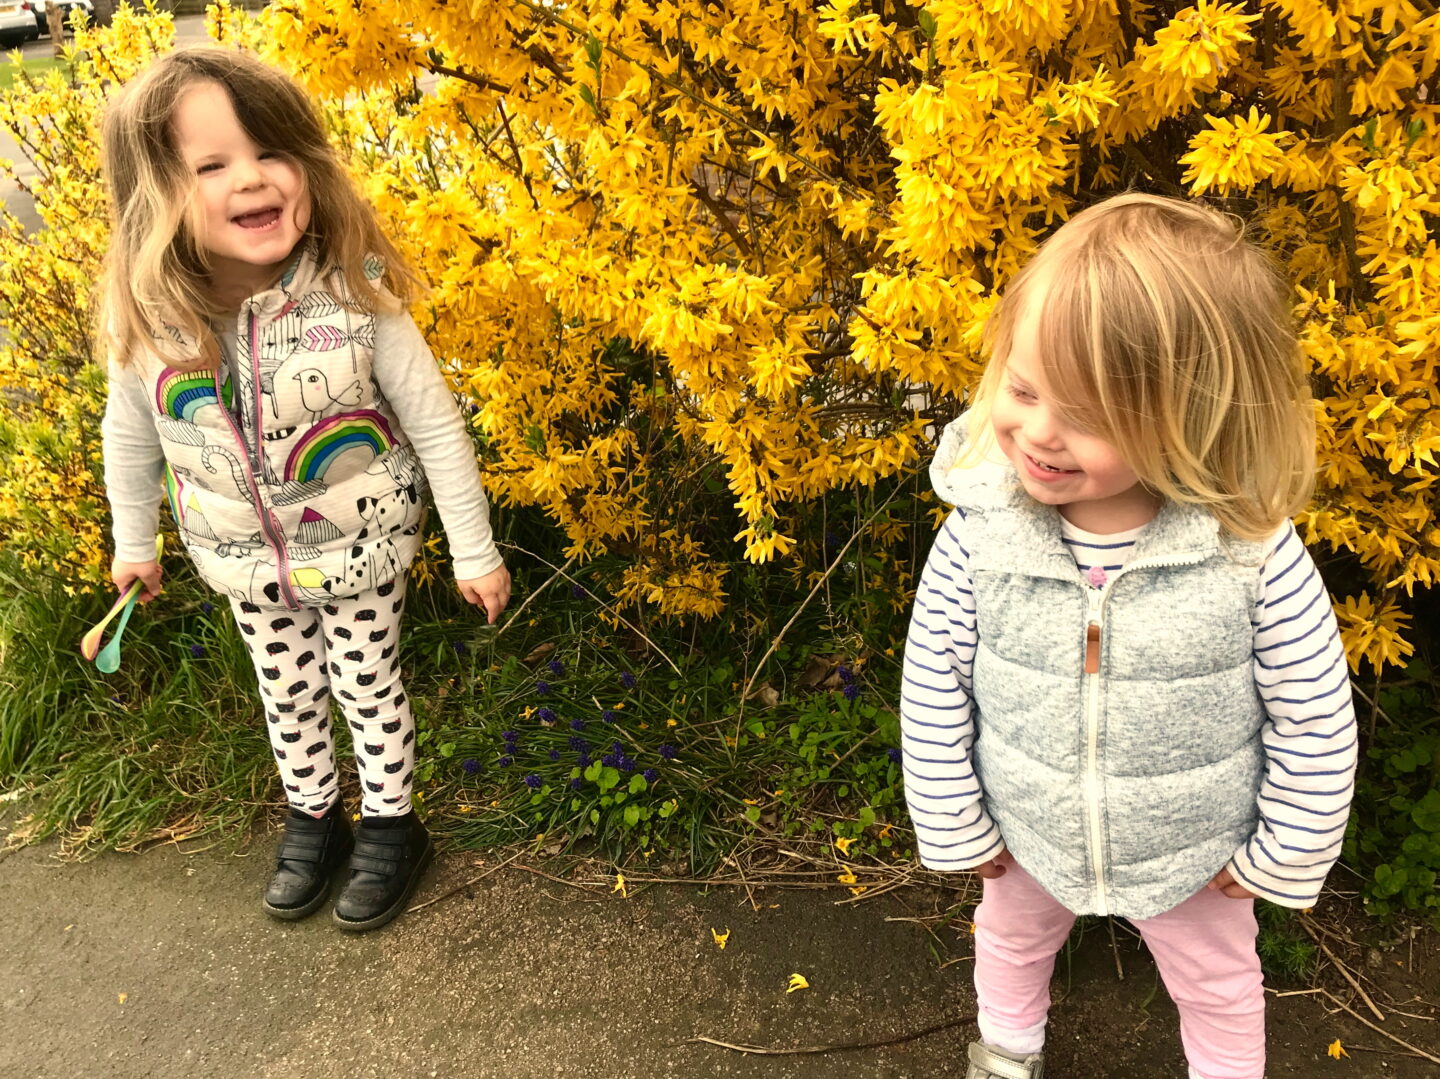 Two sisters standing in front of a yellow flowering bush, smiling